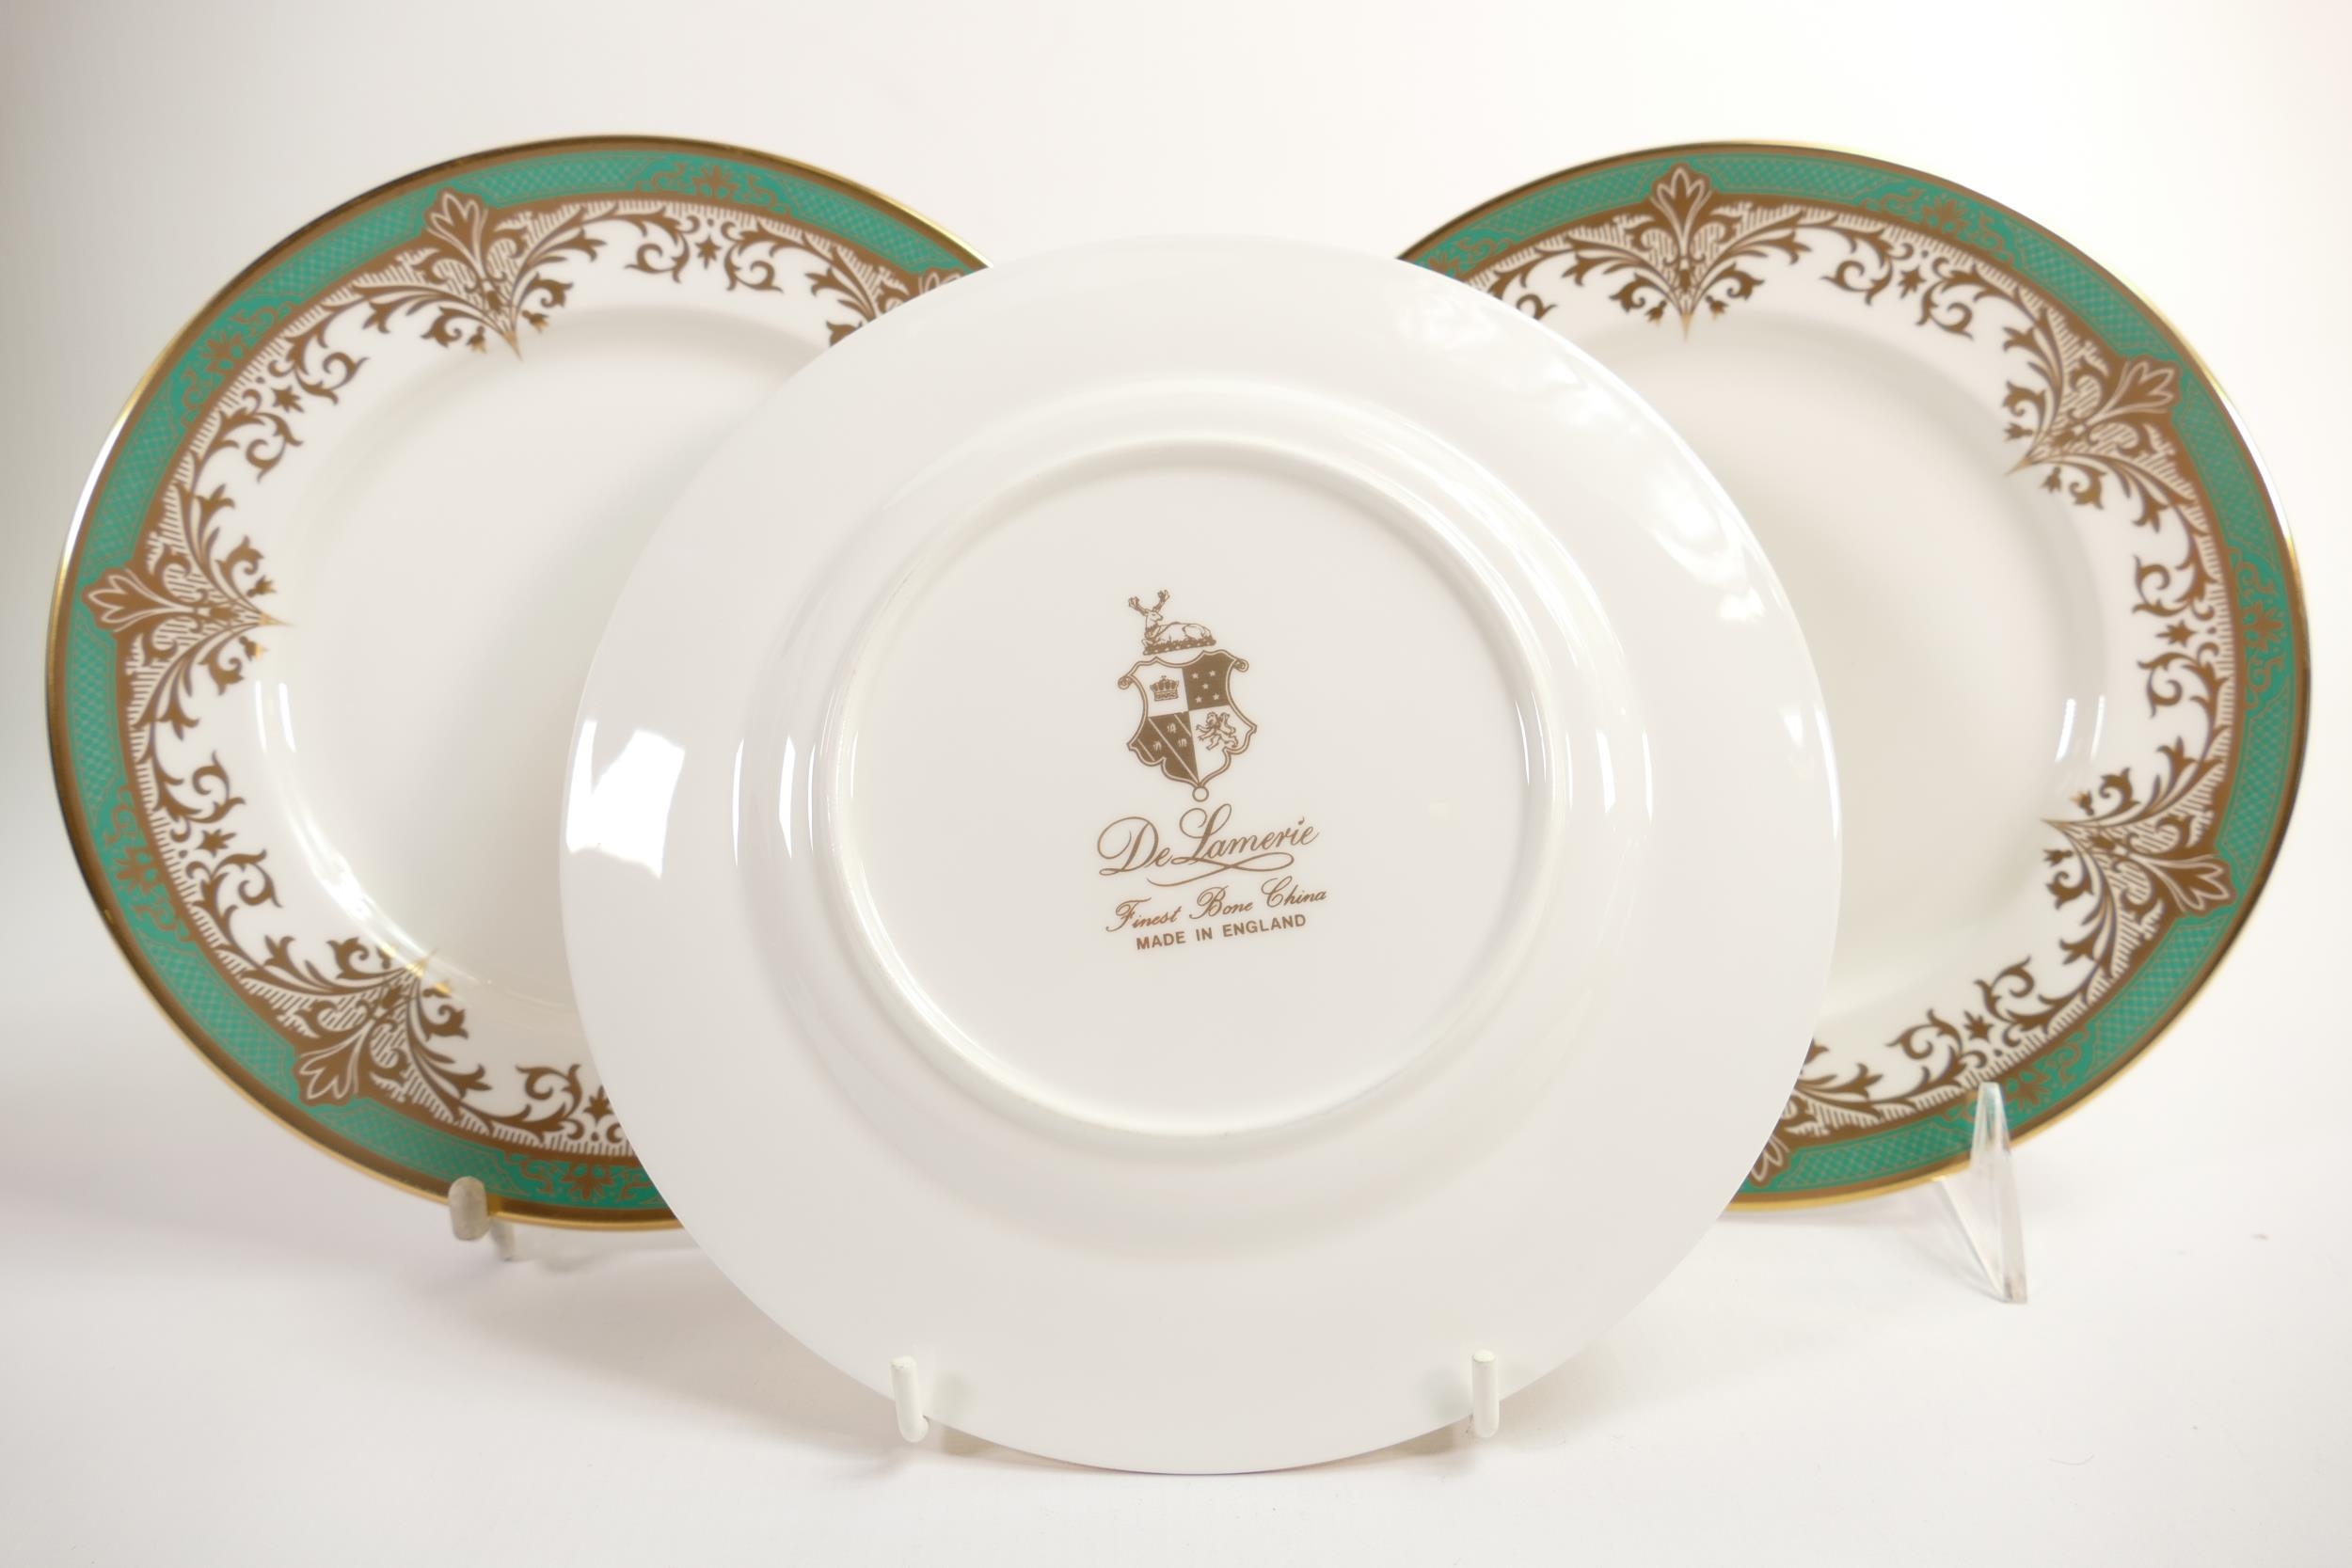 De Lamerie Fine Bone China, heavily gilded Dessert Plates , specially made high end quality item, - Image 2 of 2